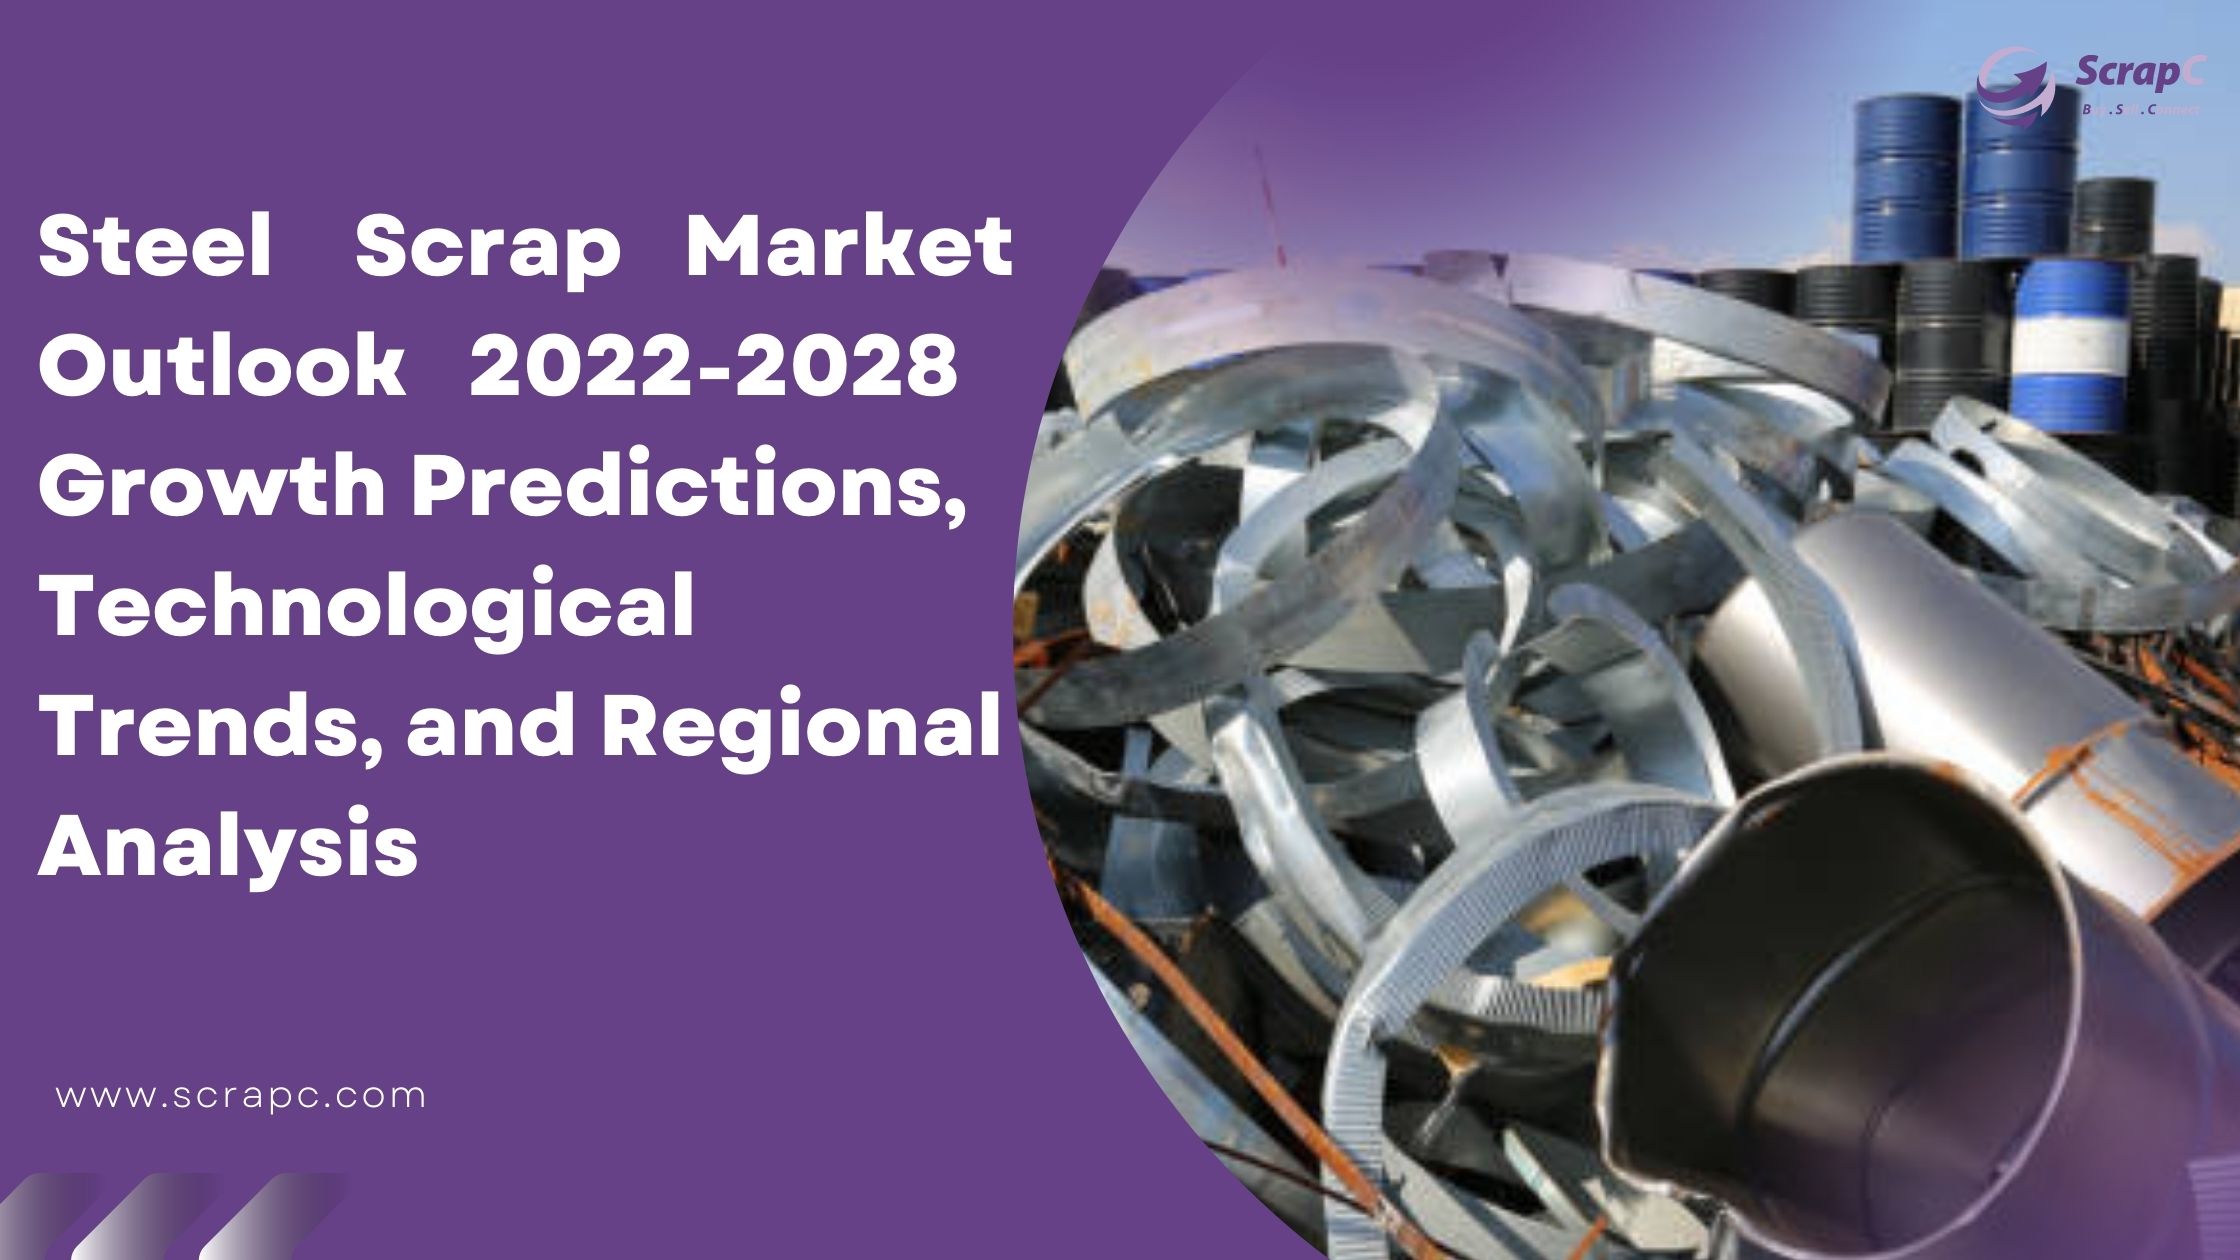 Steel Scrap Market Outlook 2022-2028: Growth Predictions, Technological Trends, and Regional Analysis